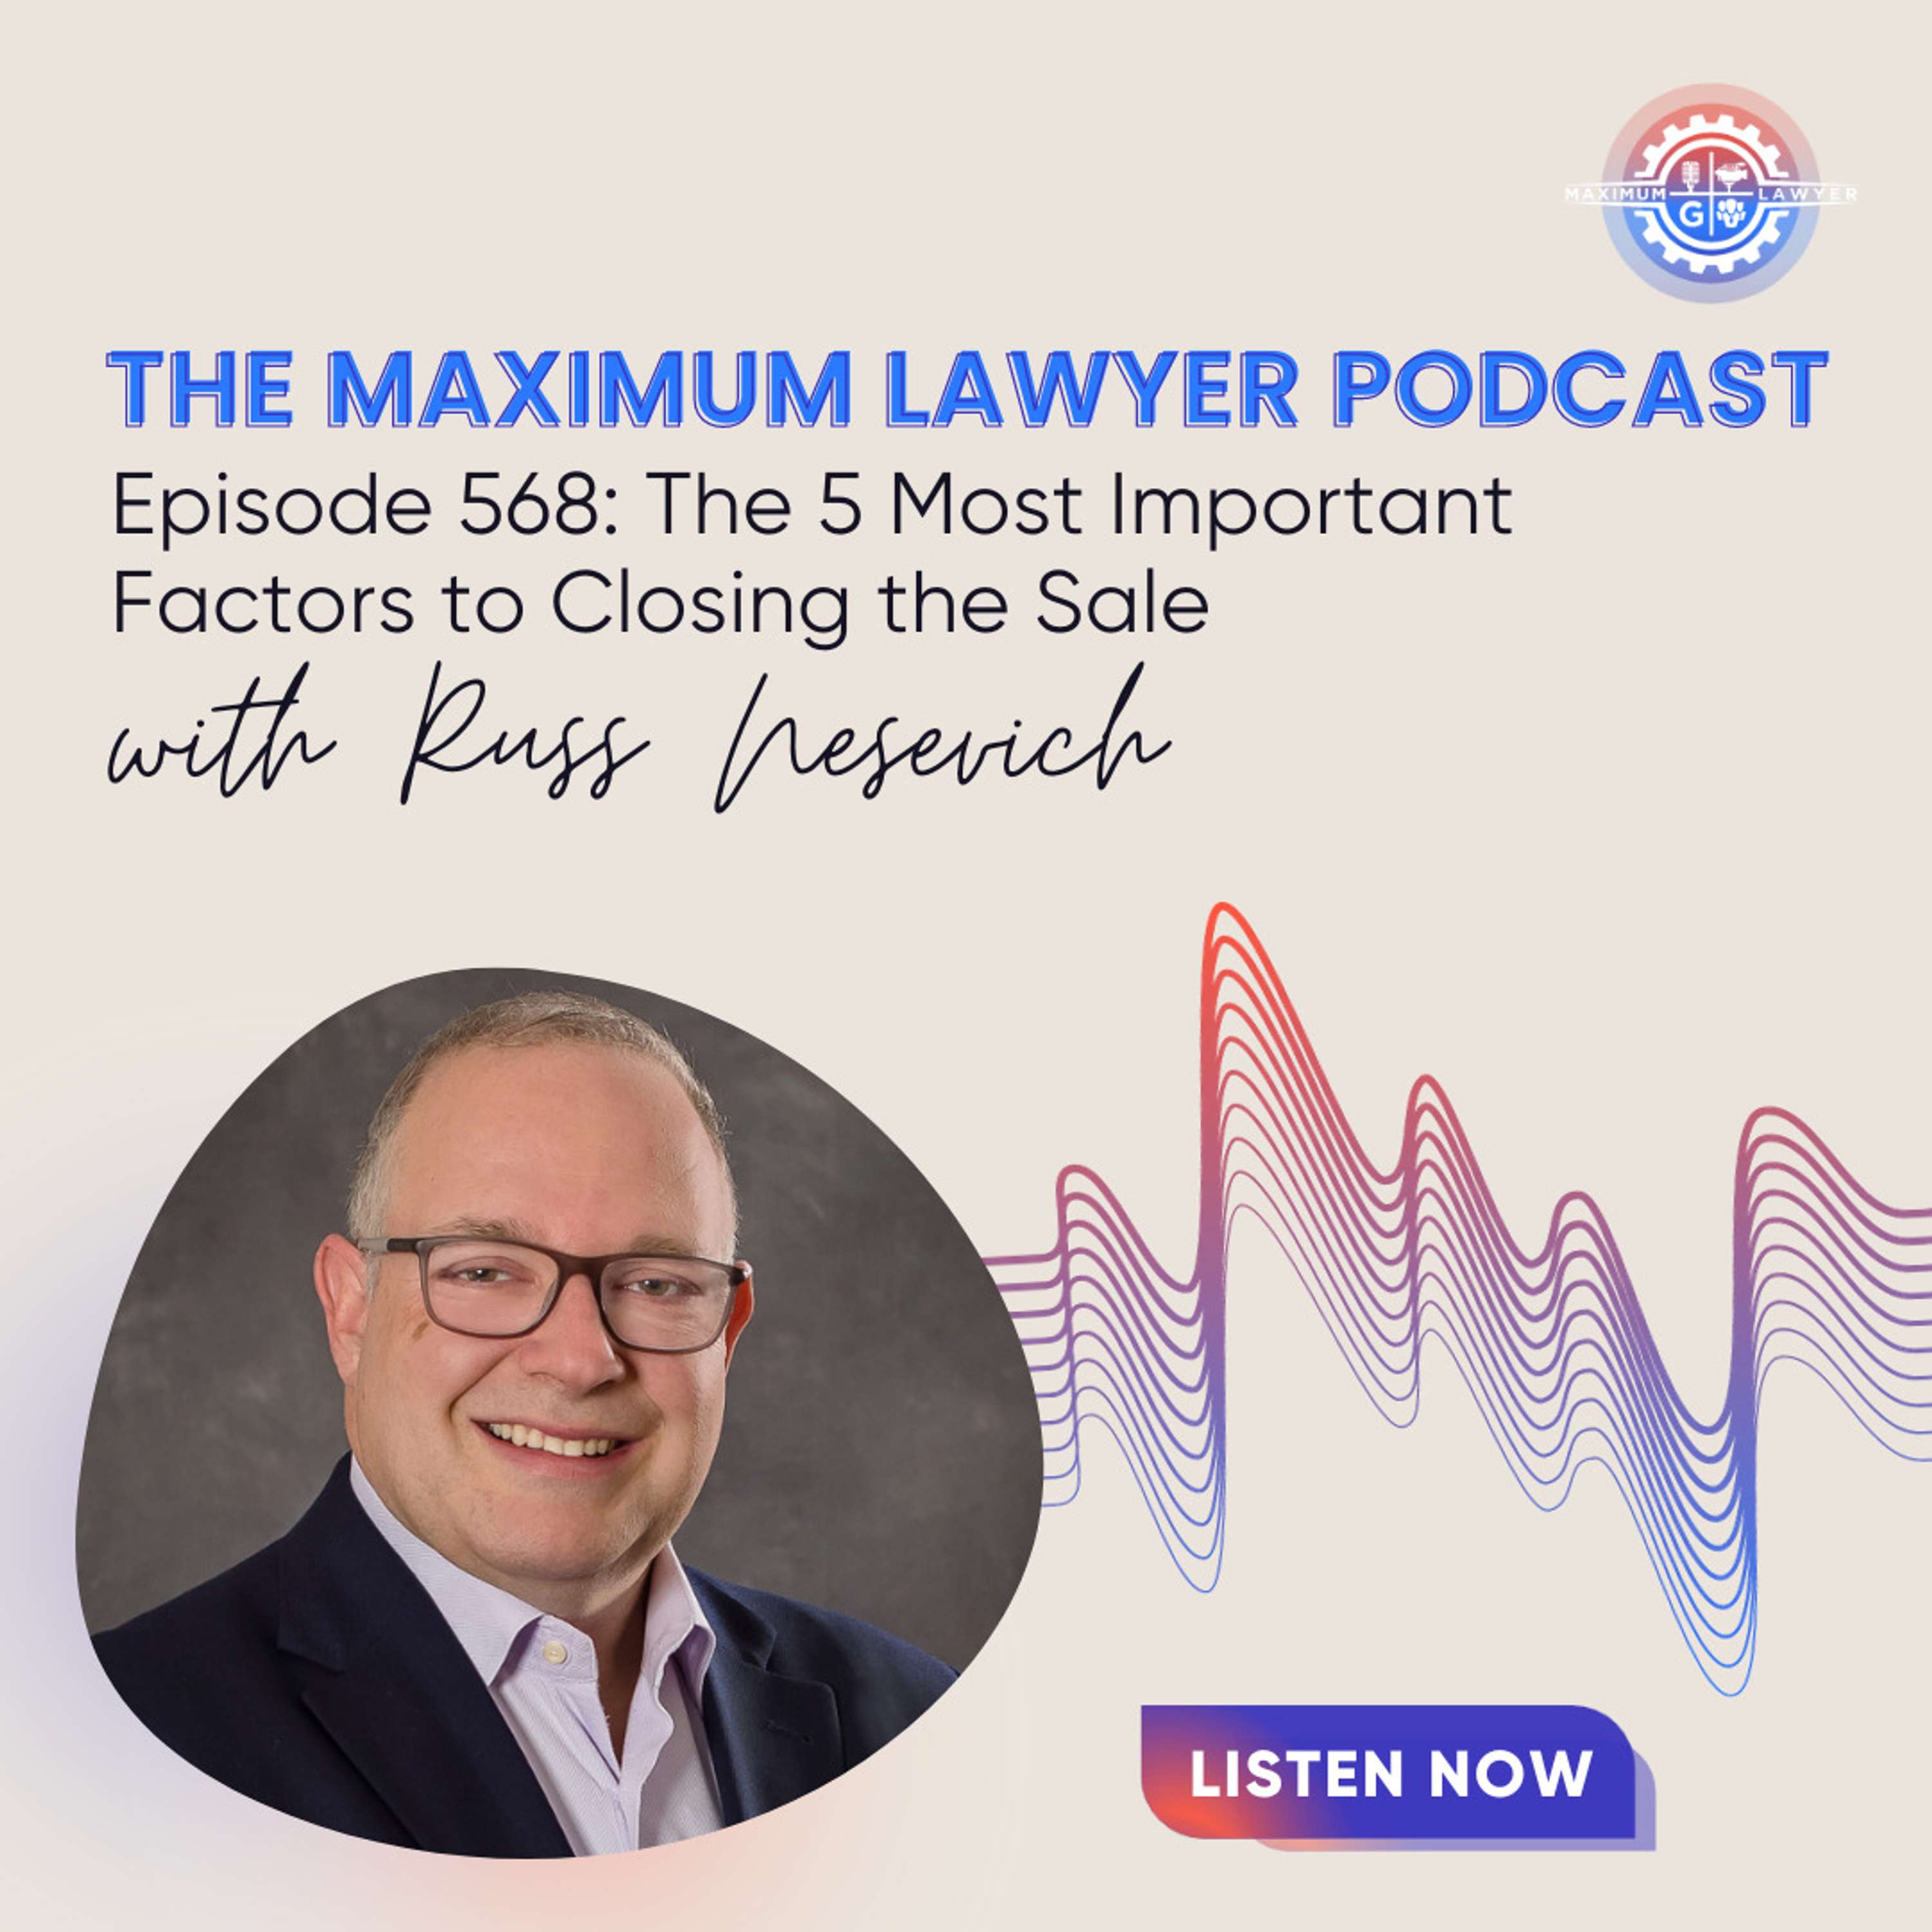 The 5 Most Important Factors to Closing the Sale with Russ Nesevich